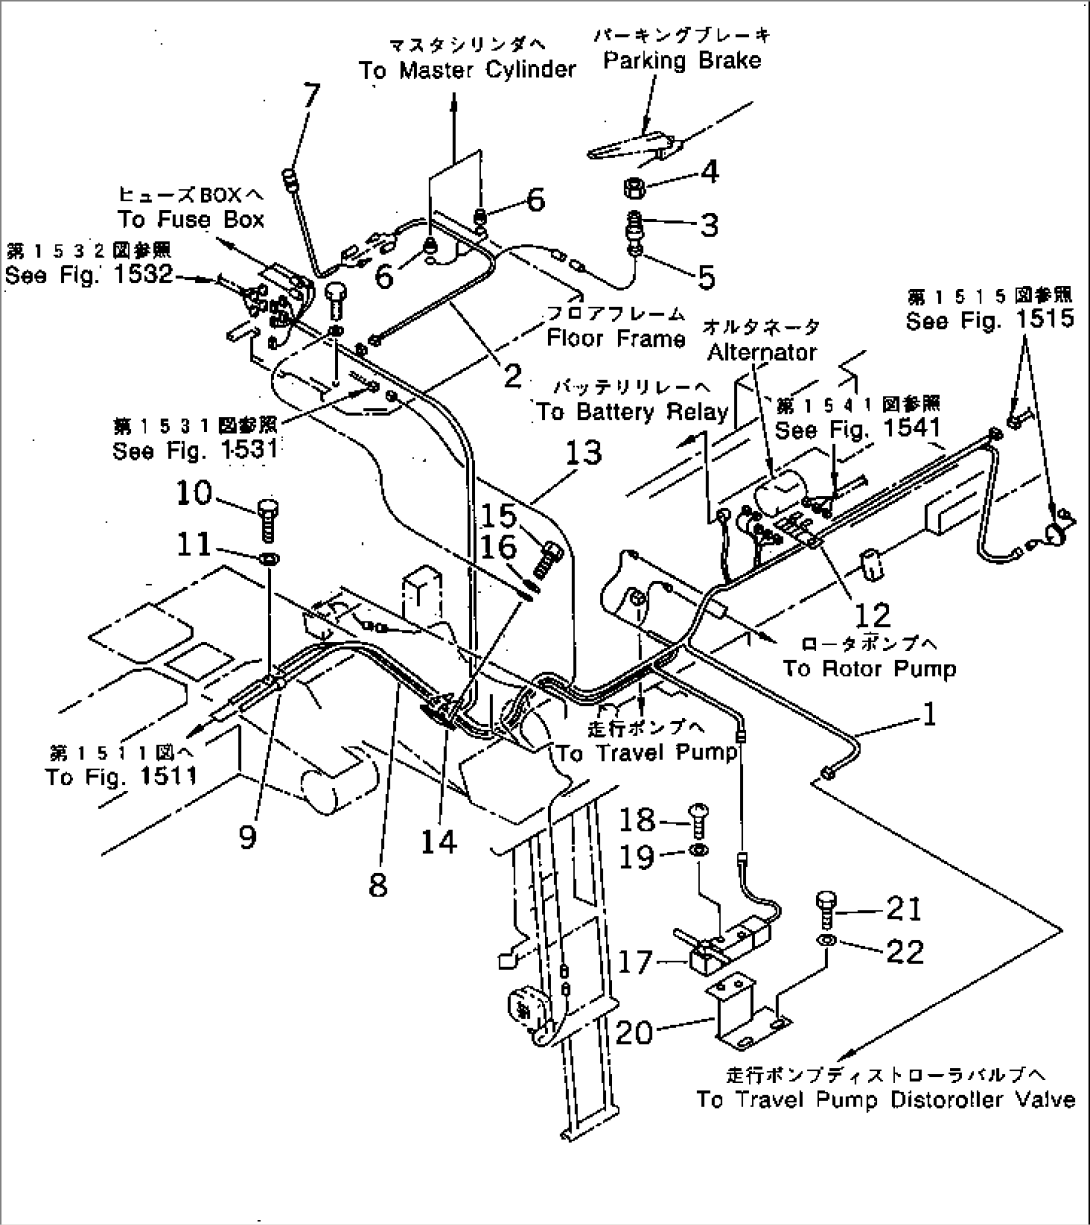 ELECTRICAL SYSTEM (MAIN FRAME LINE) (2/2)